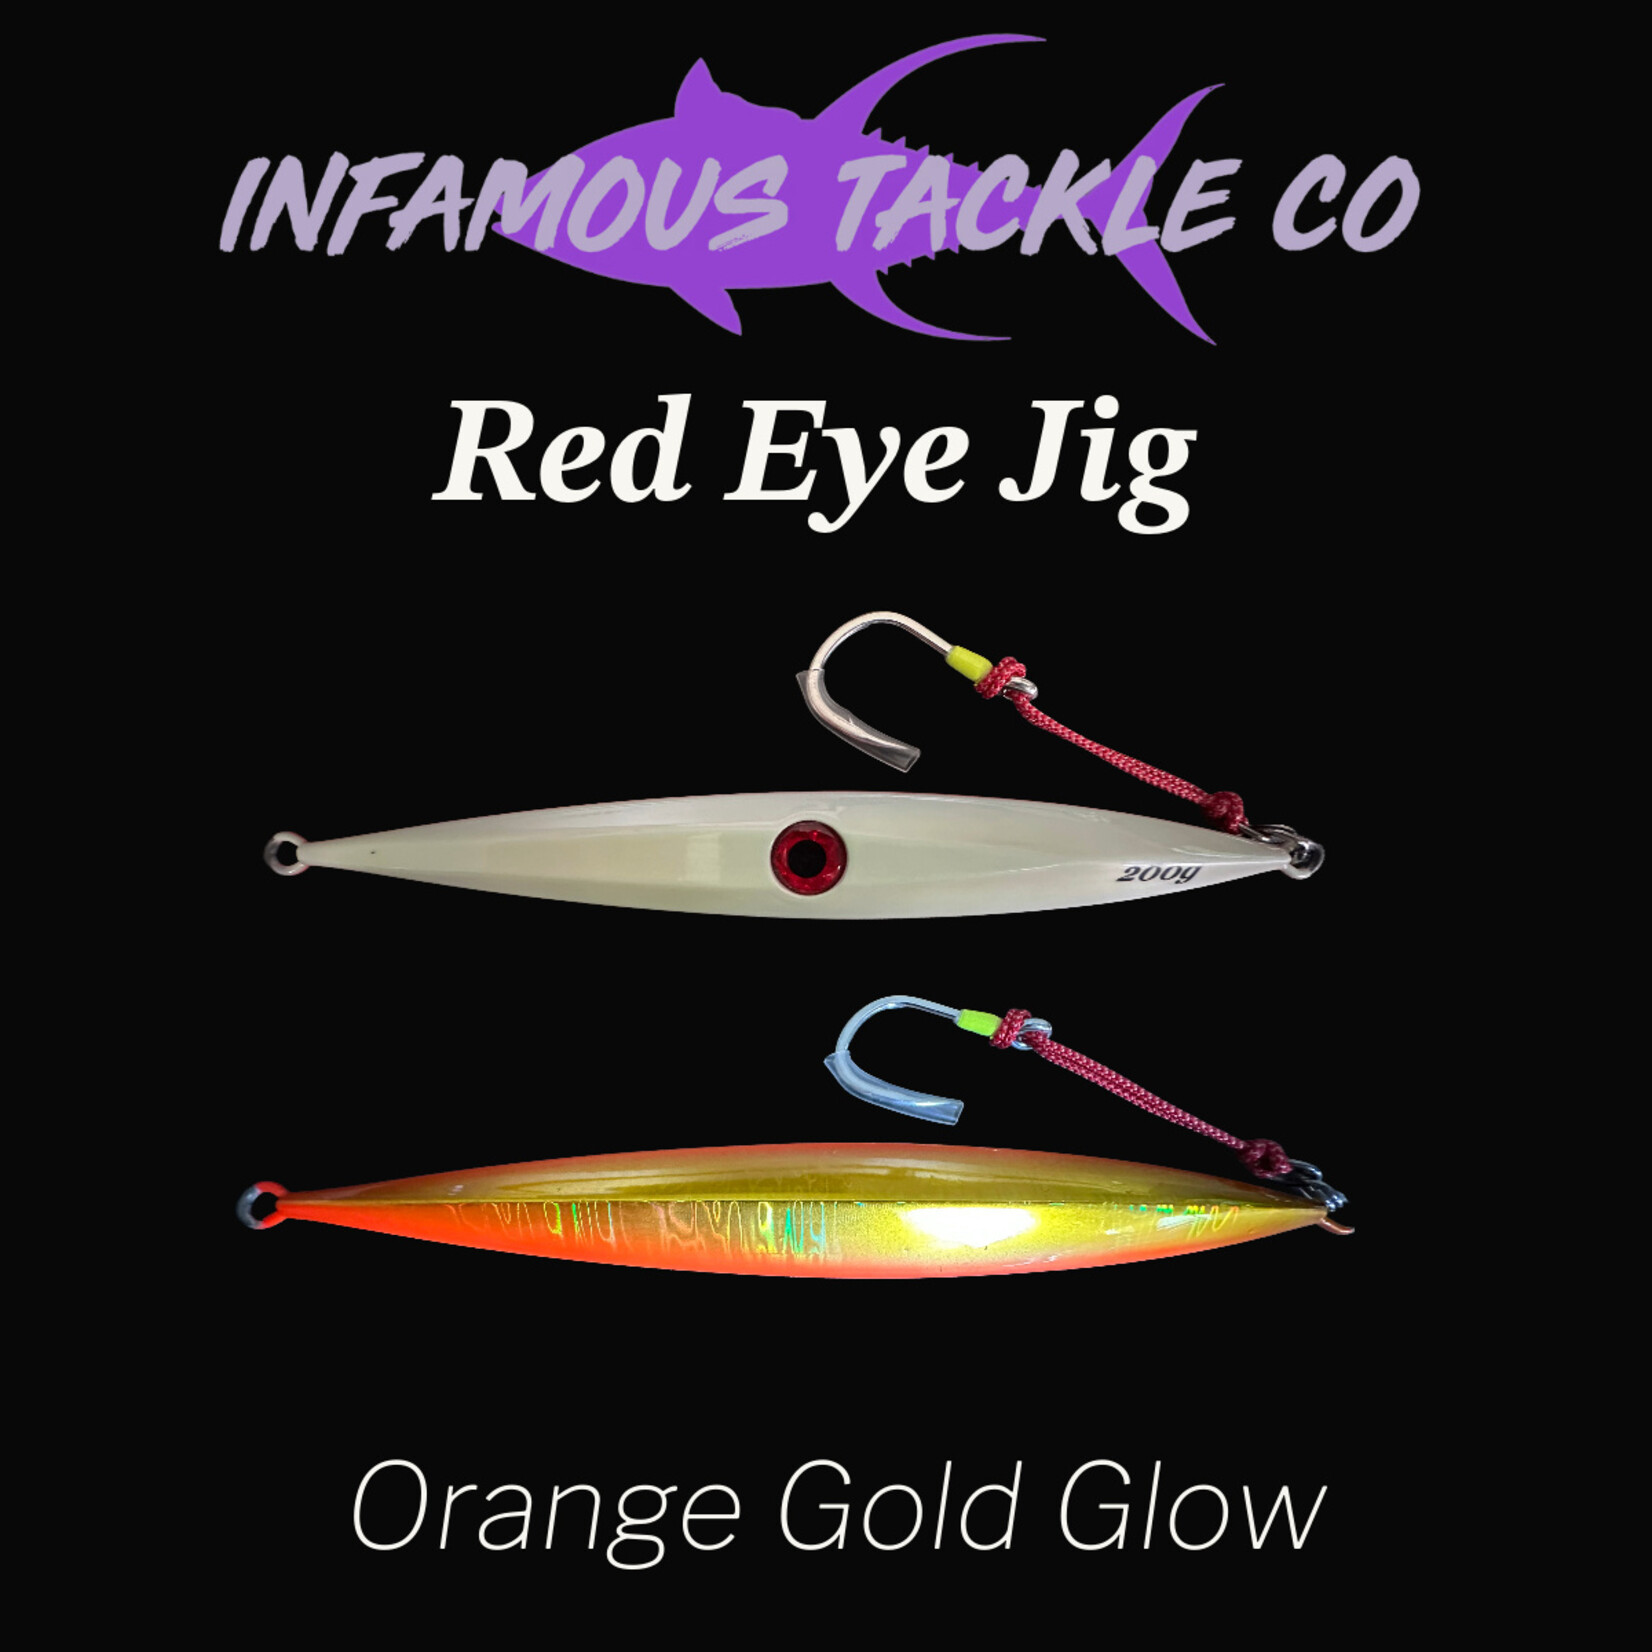 Infamous Tackle Co. Red Eye Jig